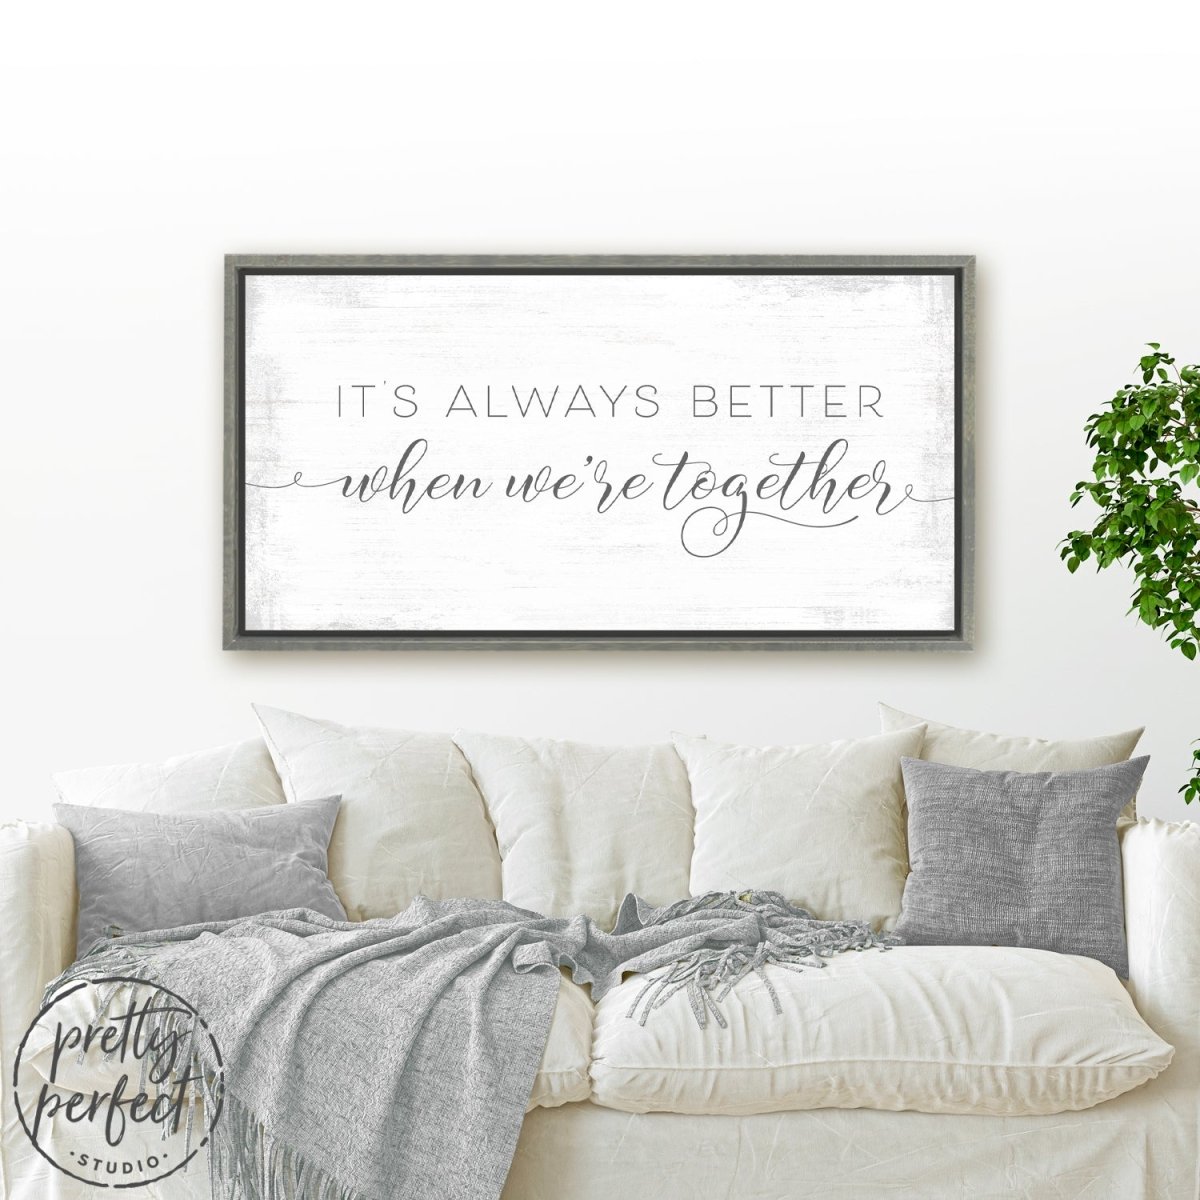 It's Always Better When We're Together Sign Above Couch - Pretty Perfect Studio 